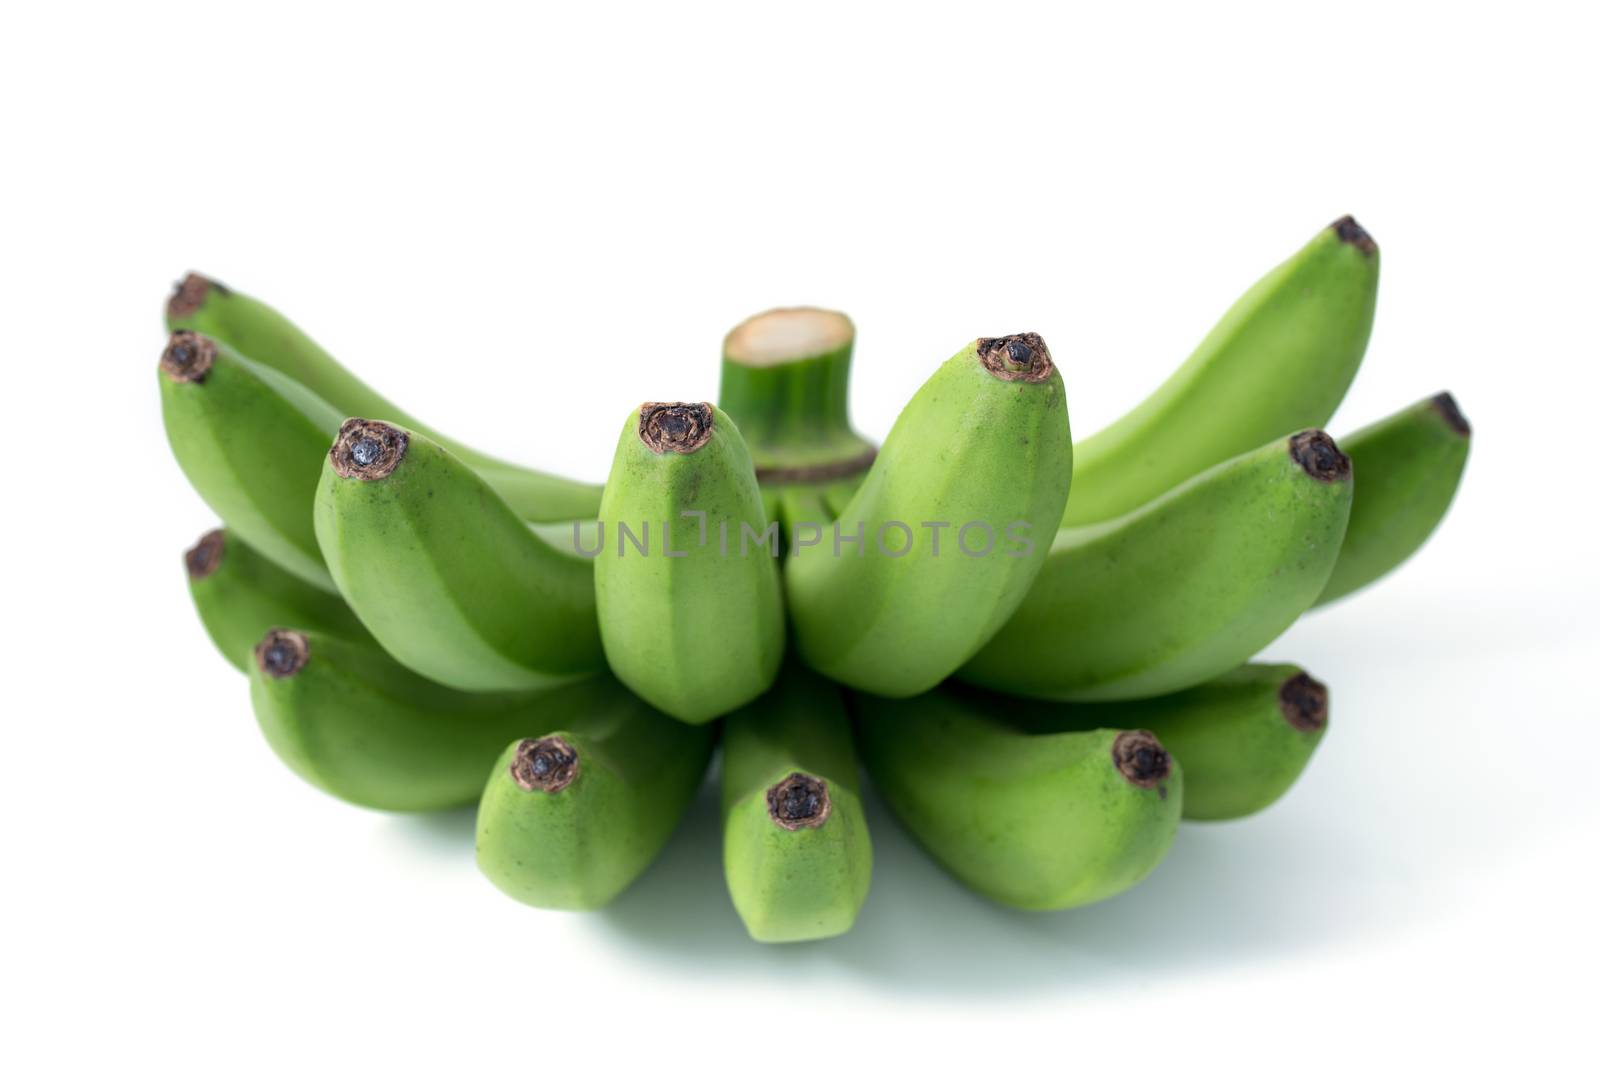 bunch of green bananas by antpkr